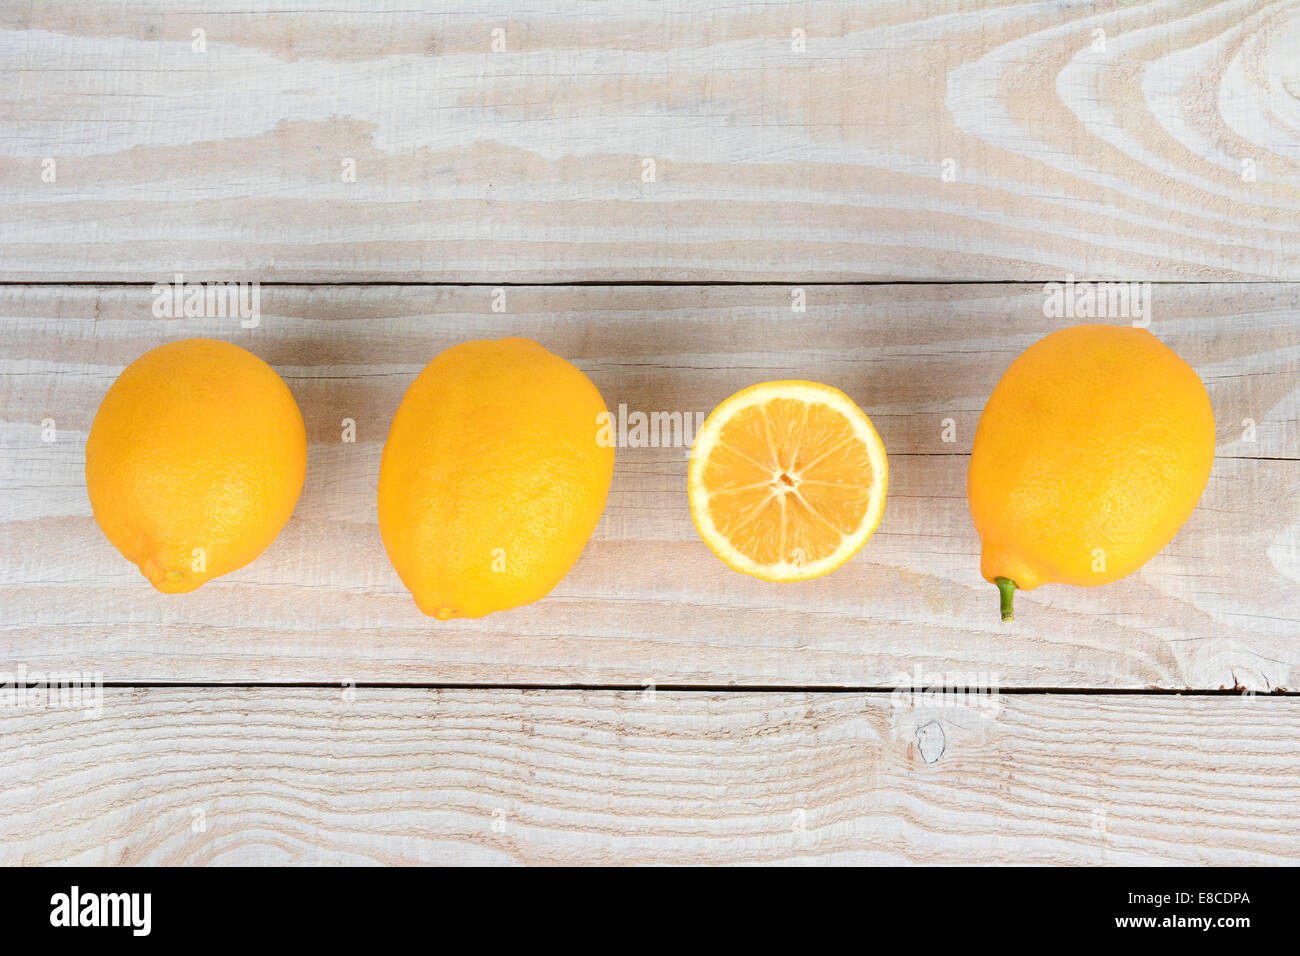 A row of lemons on a white wood kitchen table. One of the lemons is cut in half exposing is flesh. Stock Photo